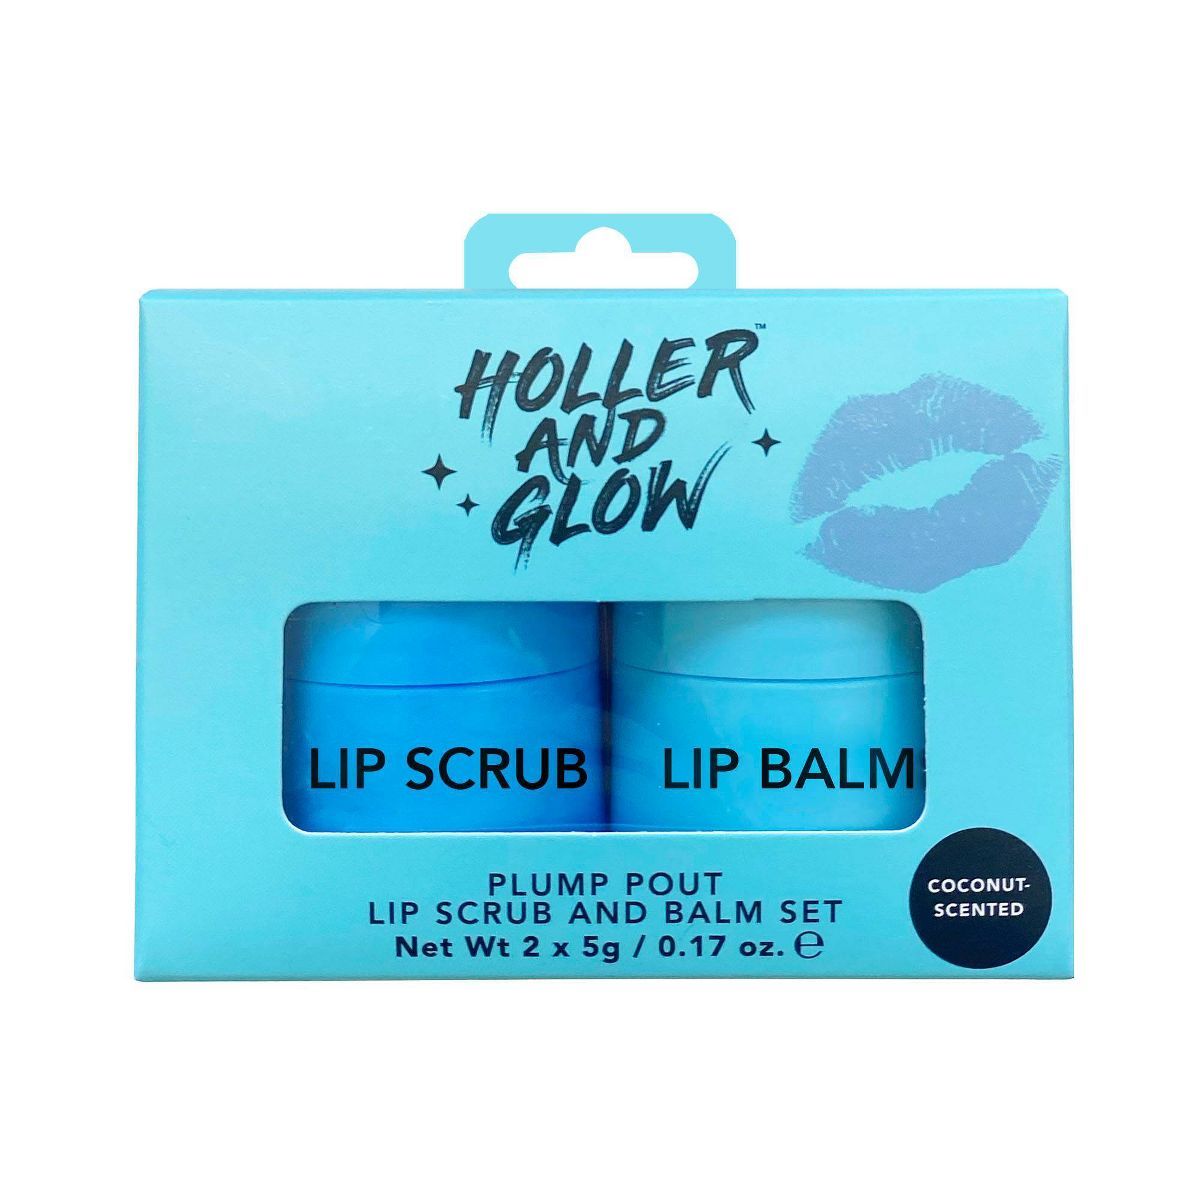 Holler and Glow Plump Pout Lip Scrub and Balm Set - Coconut - 0.17oz/2ct | Target